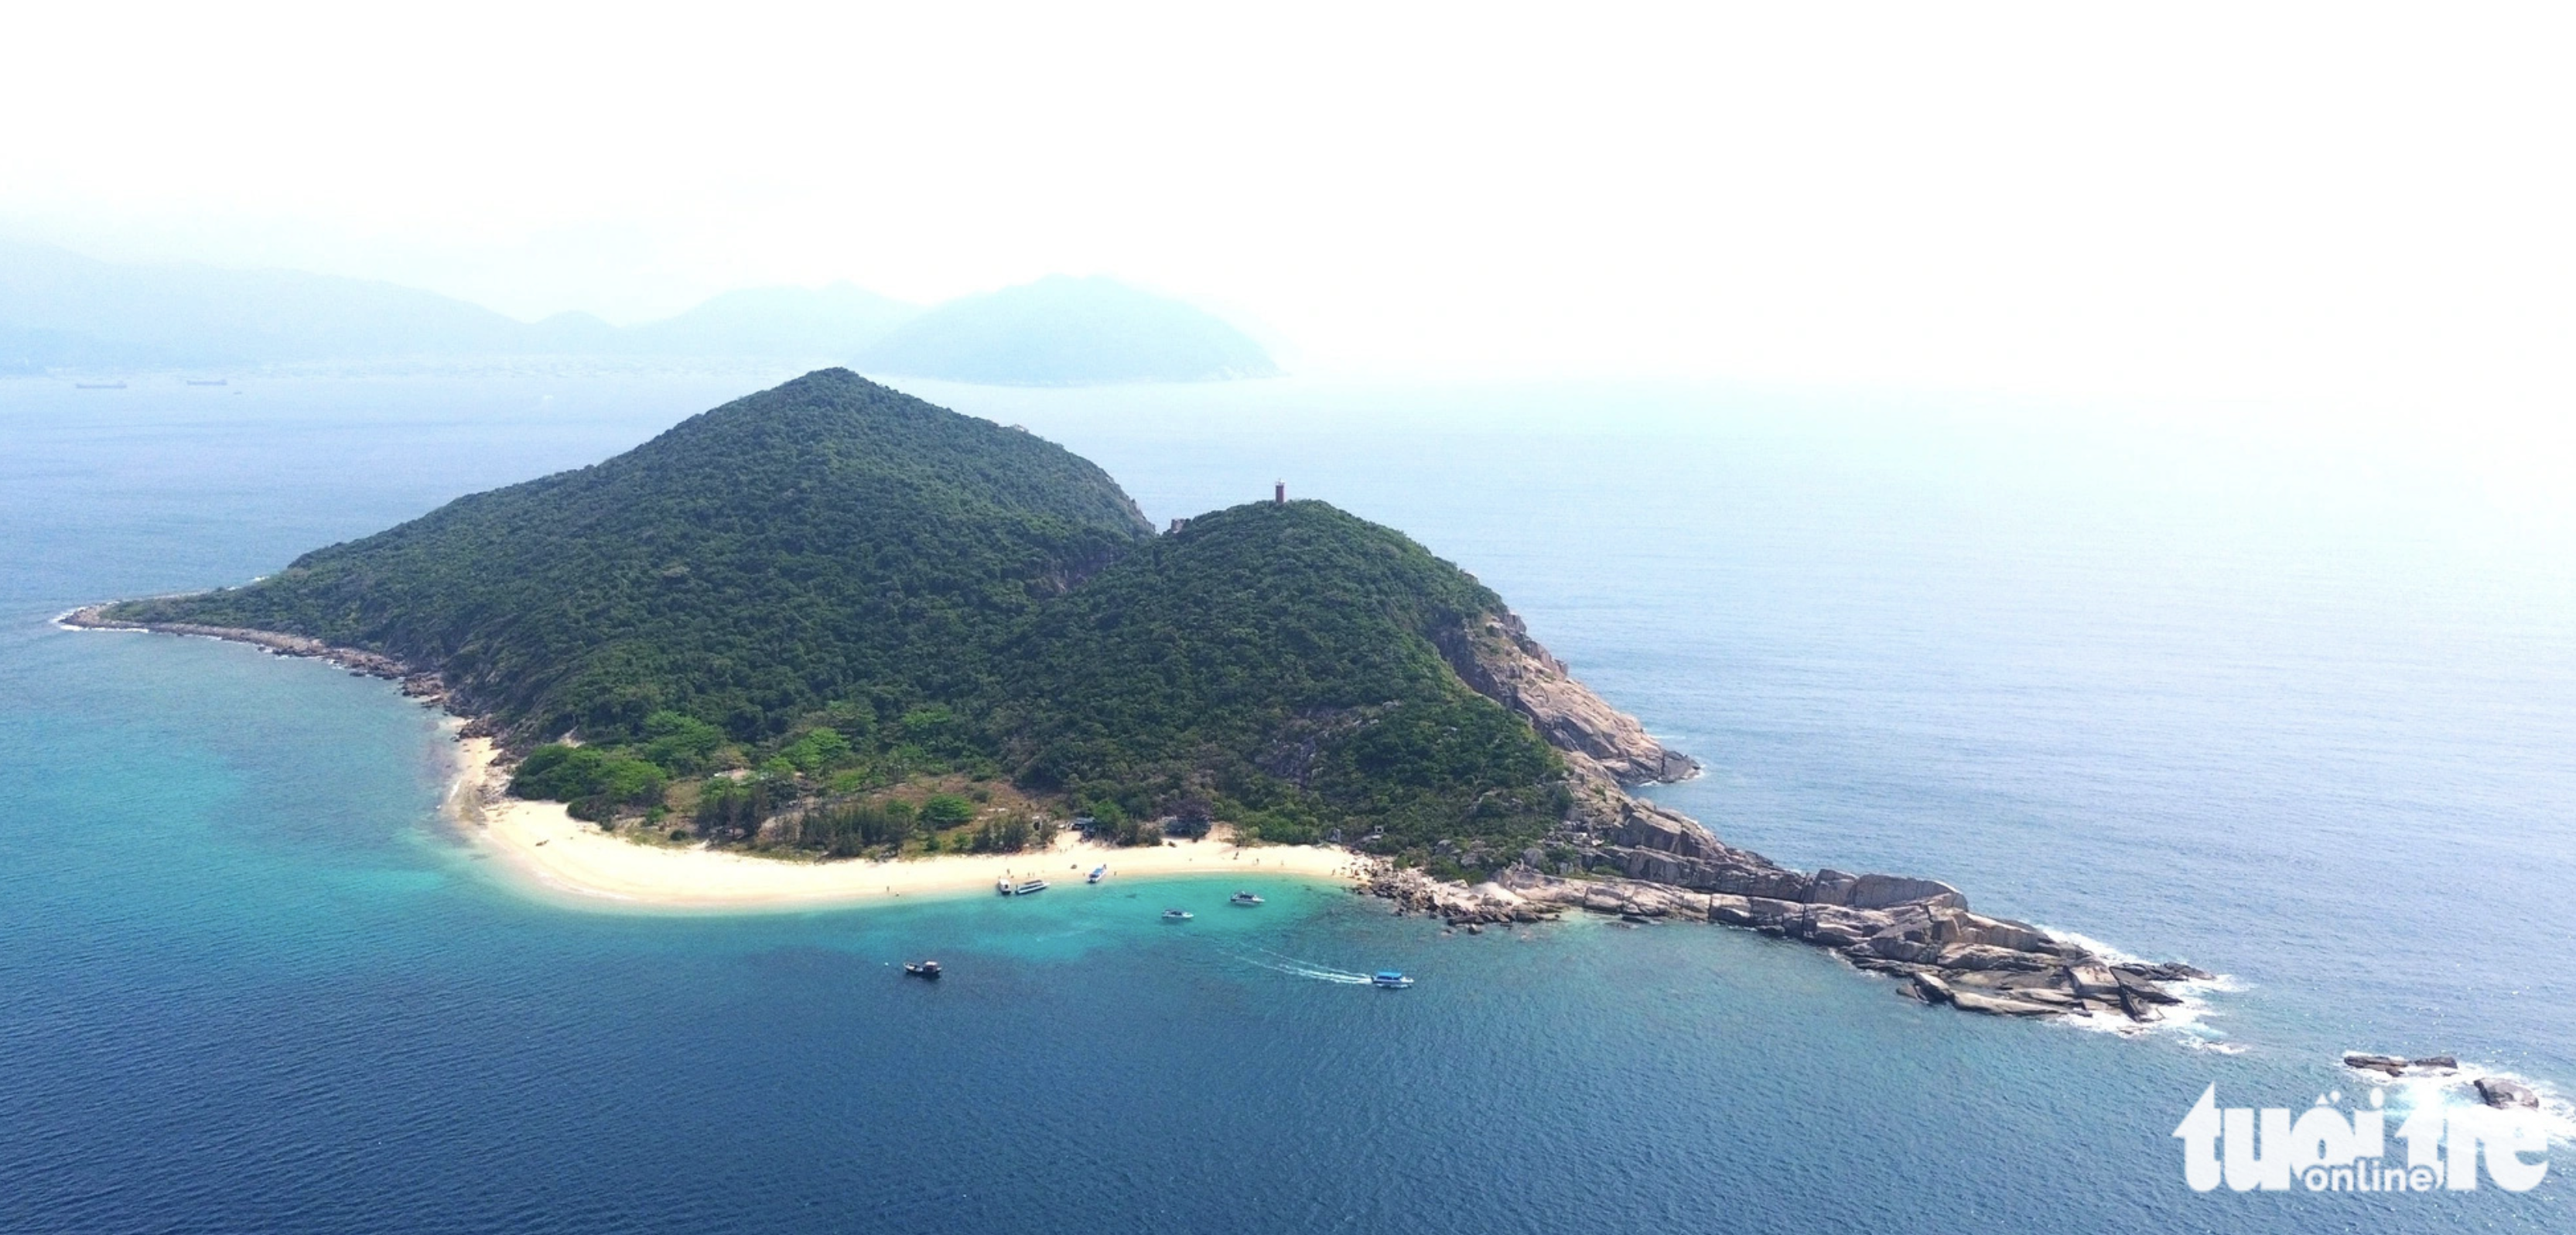 A bird’s eye view of Hon Nua Island off Phu Yen and Khanh Hoa Provinces, south-central Vietnam. The island is in the shape of a dinosaur. Photo: Nguyen Hoang / Tuoi Tre